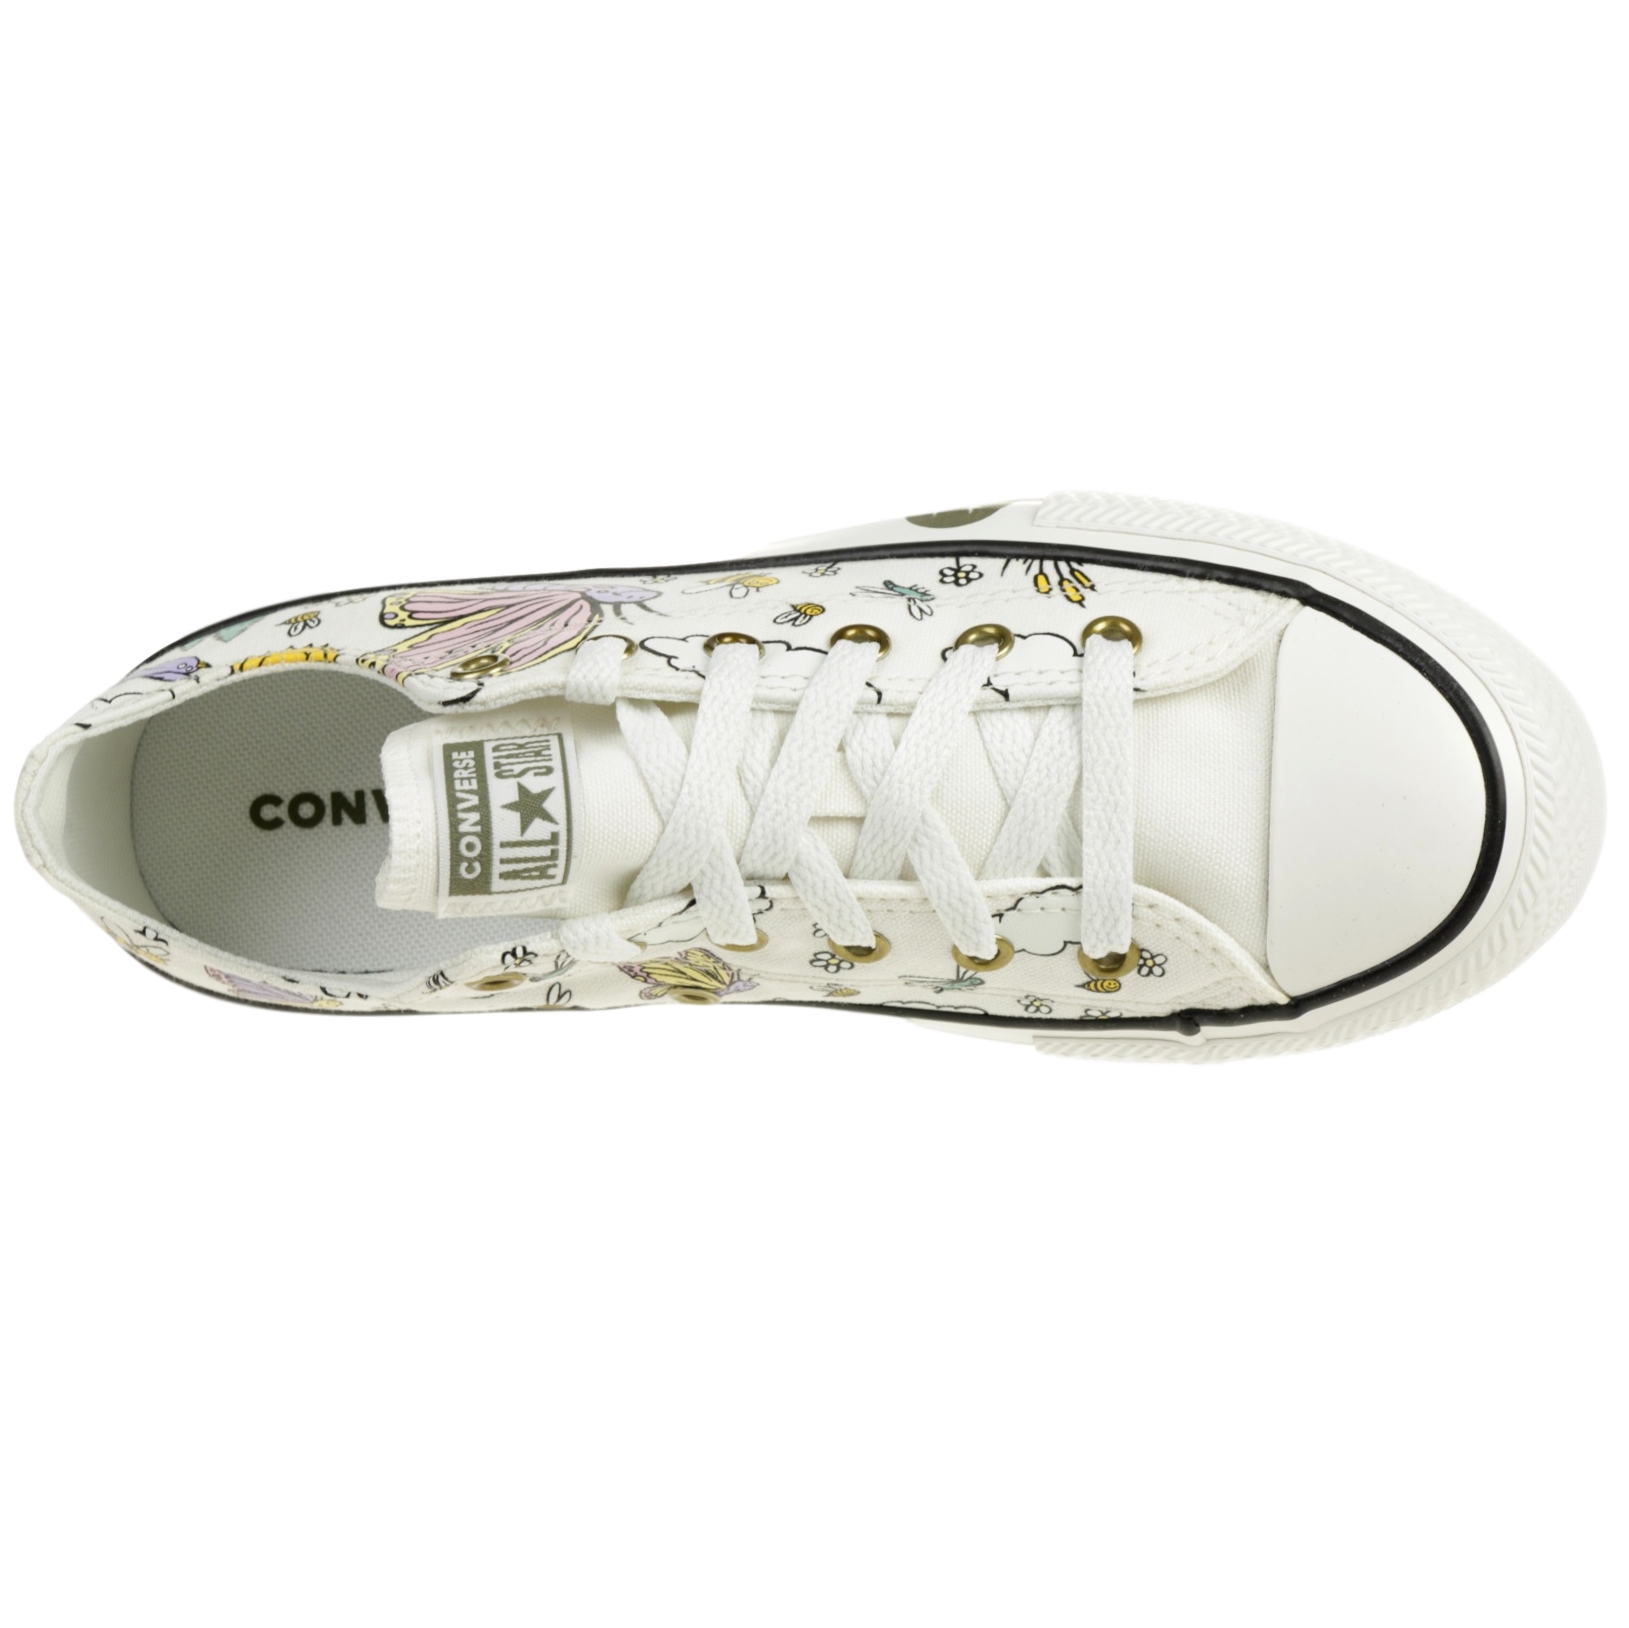 Converse Chuck Taylor All Star Ox Low Top Unisex Kinder Sneaker 667898C Beige 